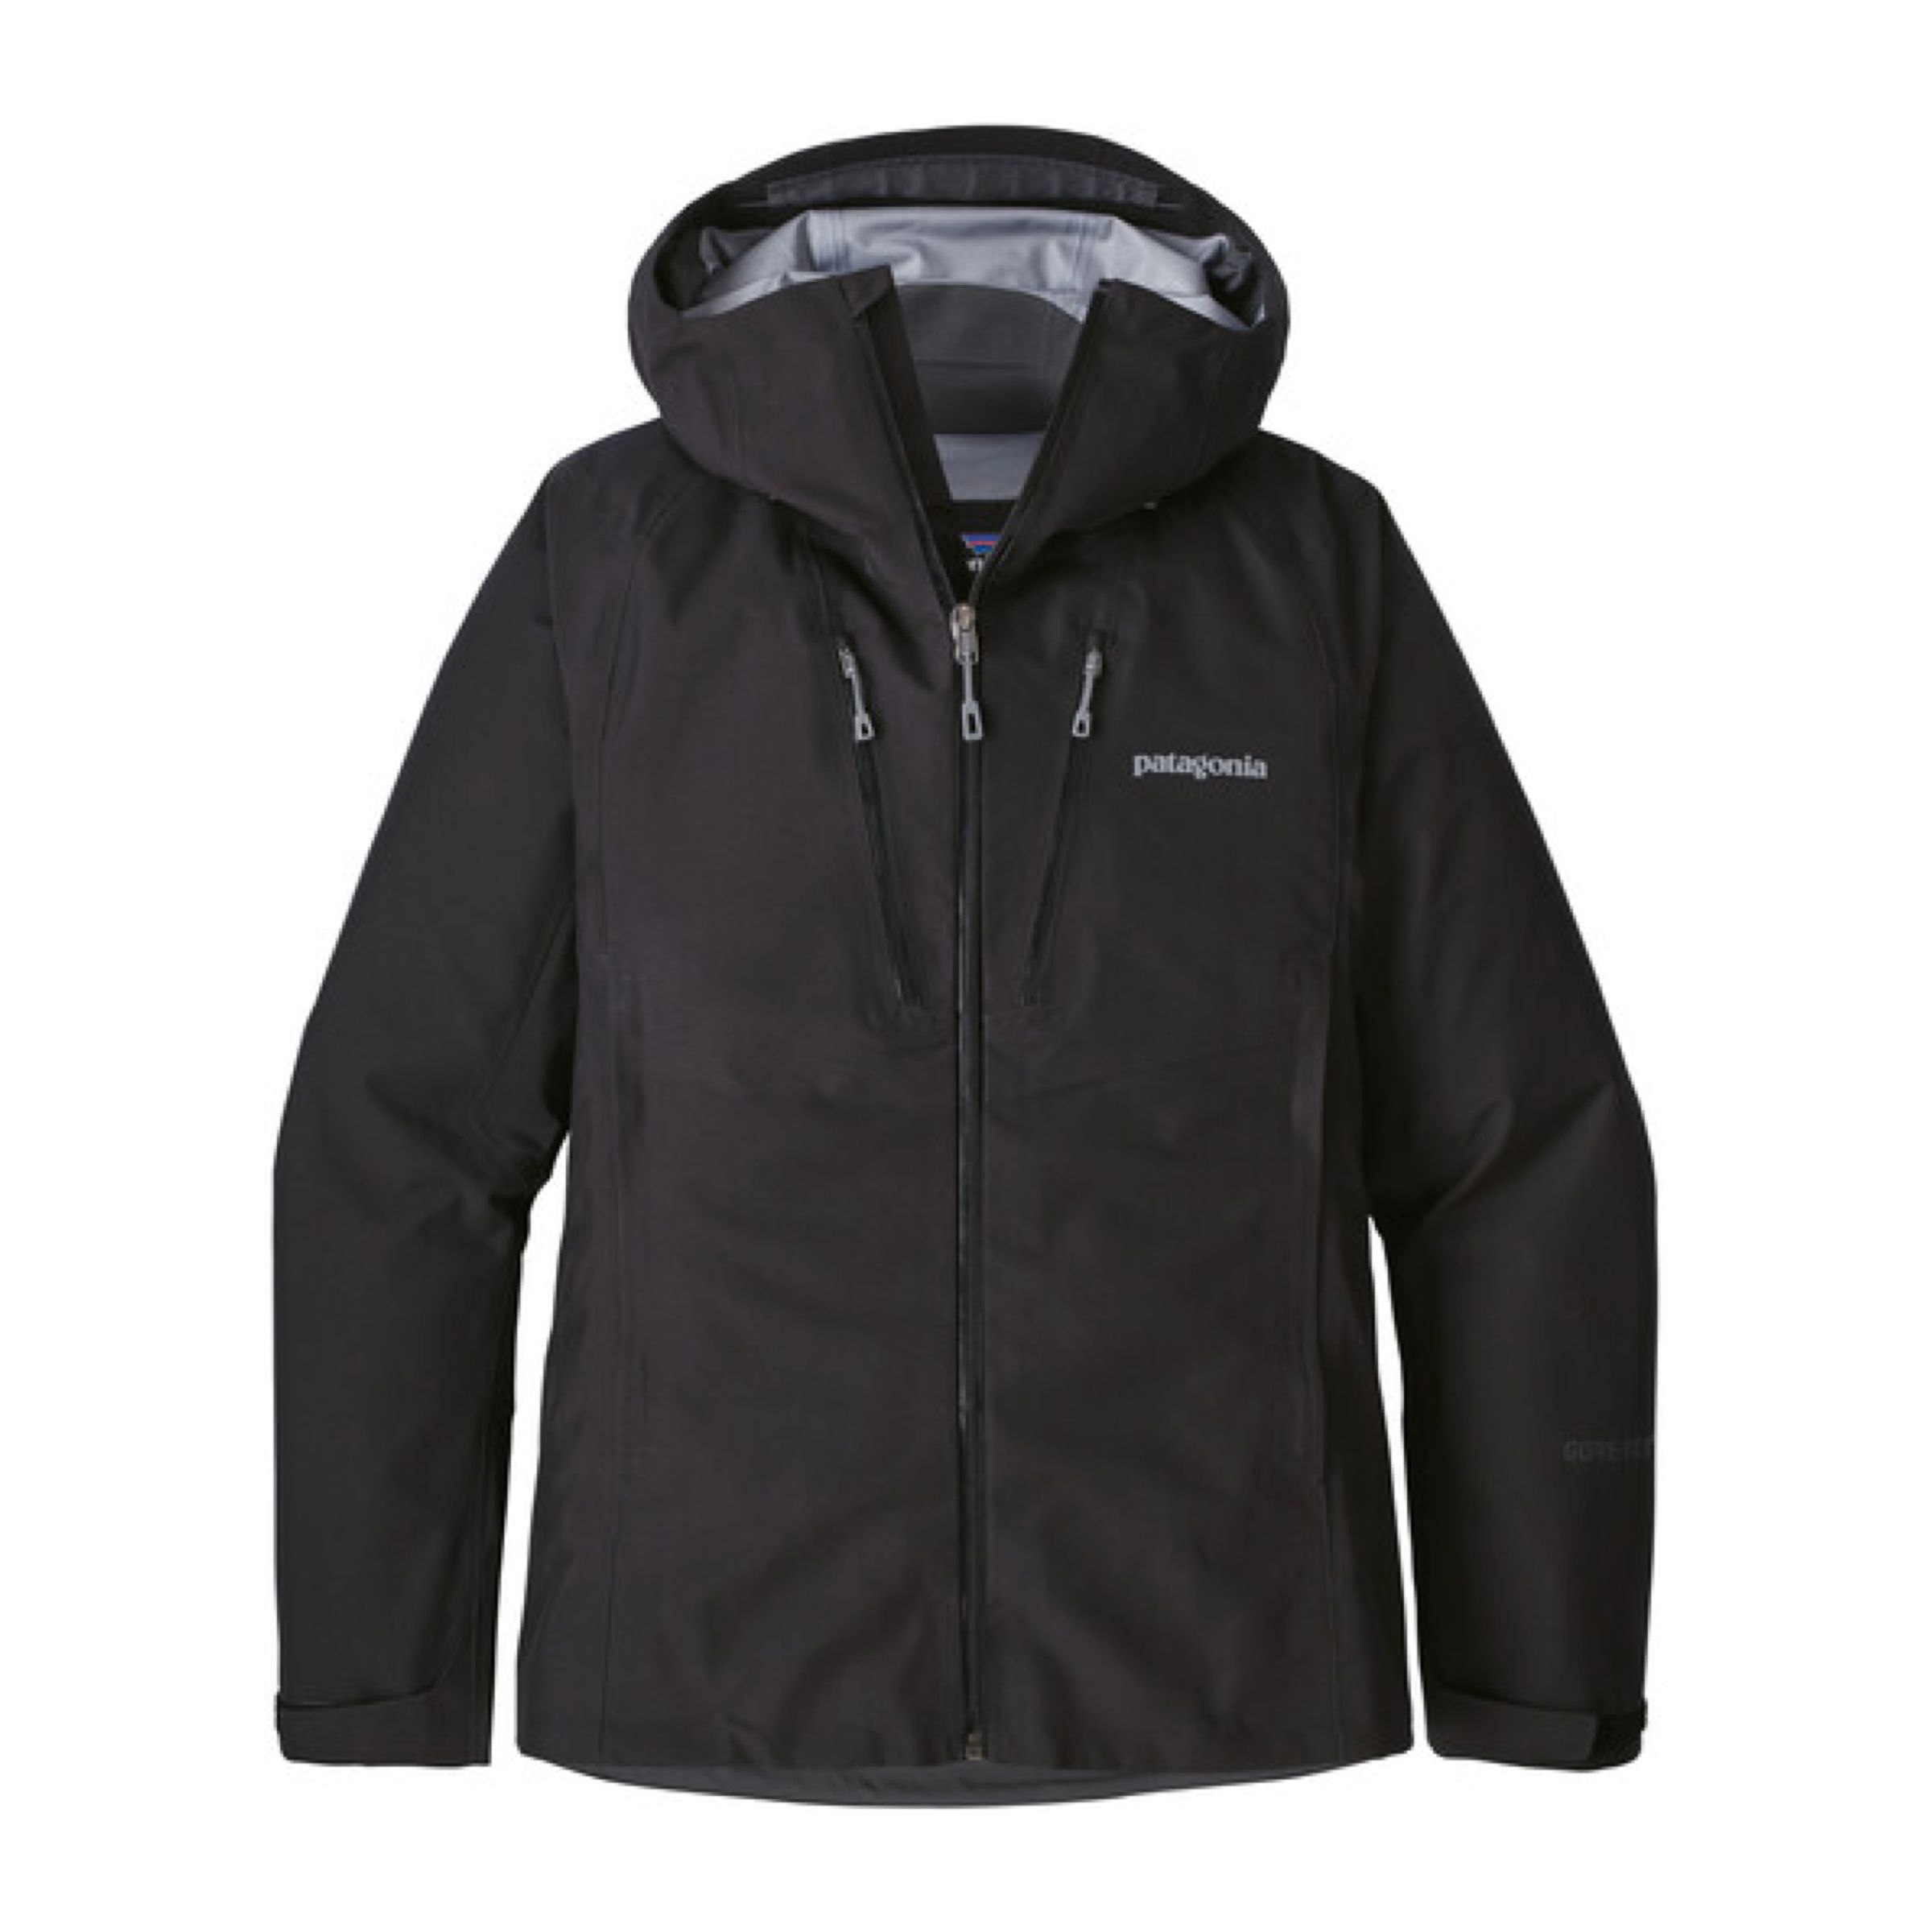 Patagonia Giacca Triolet Donna Black